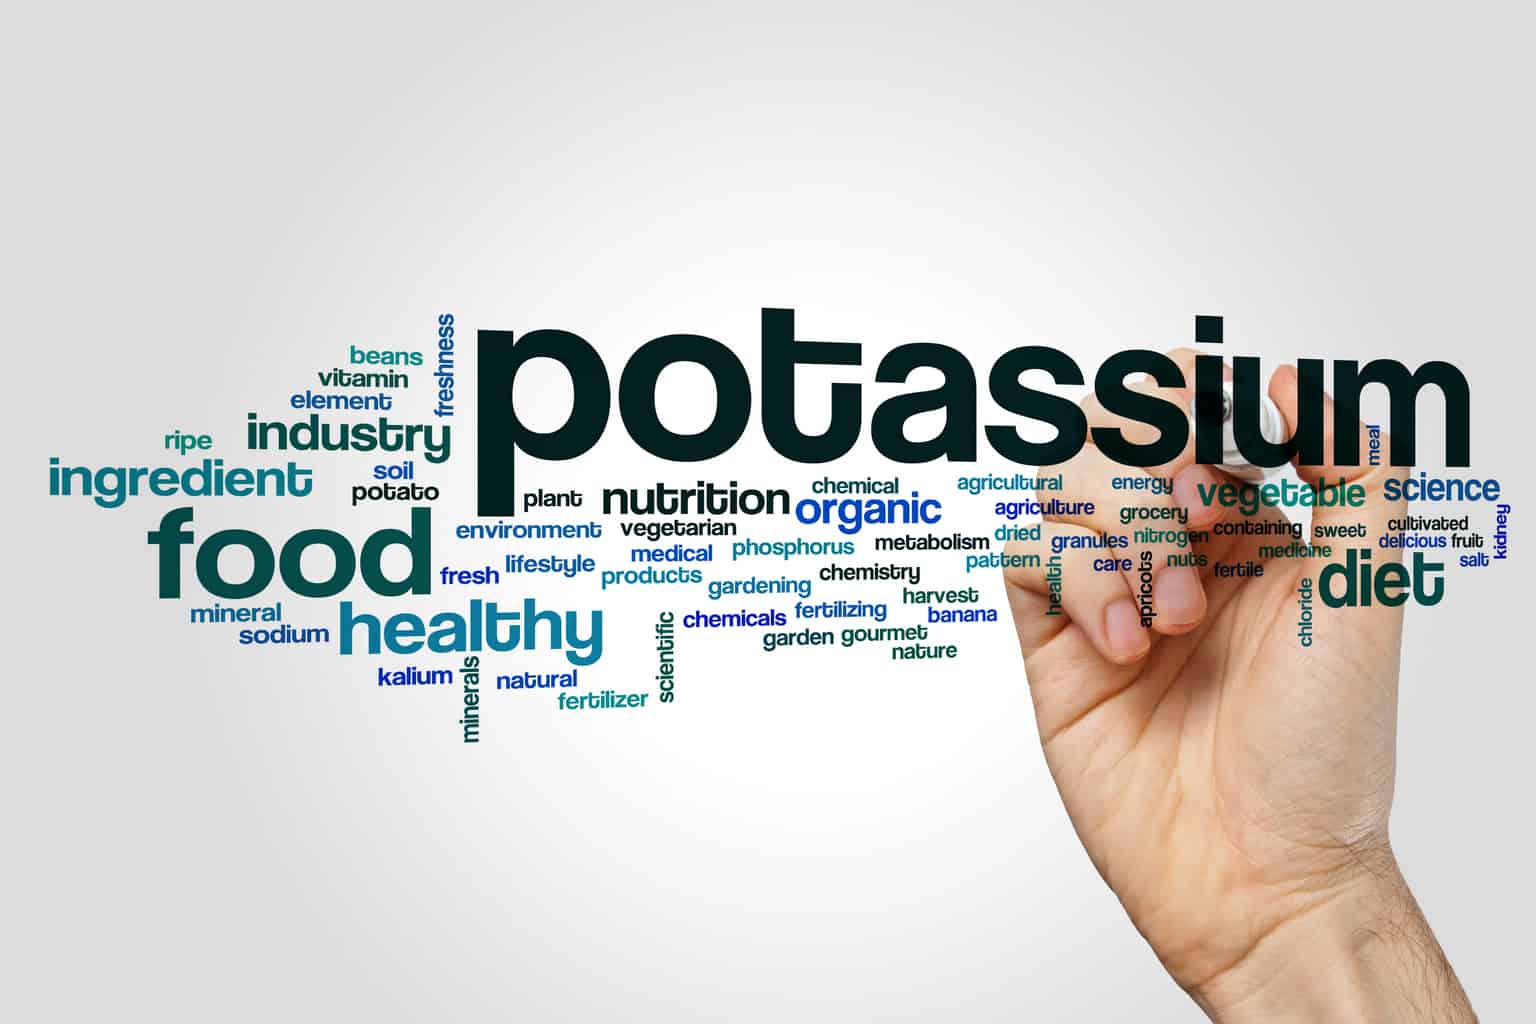 Potassium prevents Cancer - easy to put into your diet